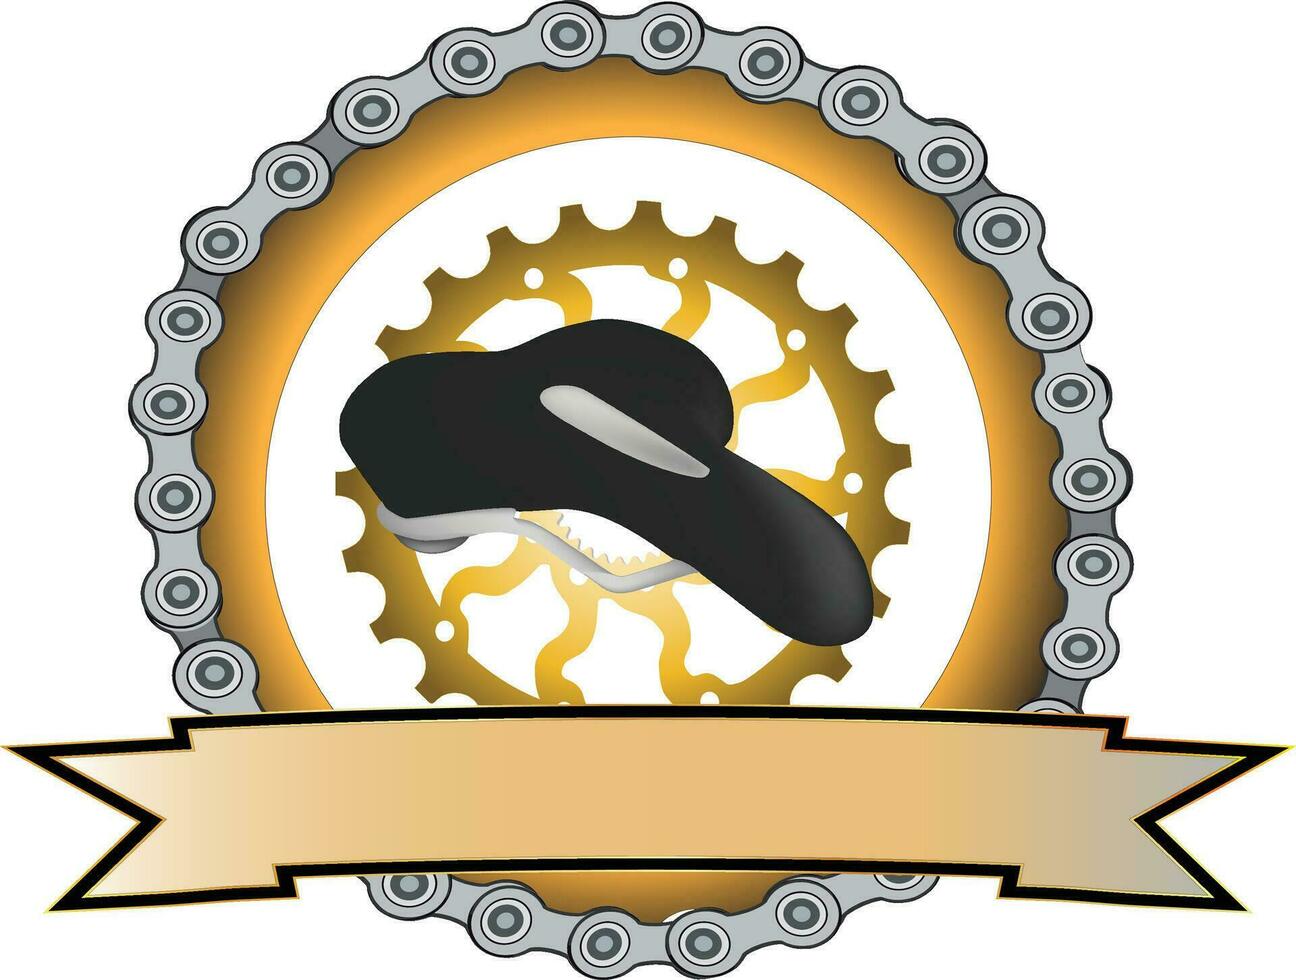 bicycle gear rim chain vector